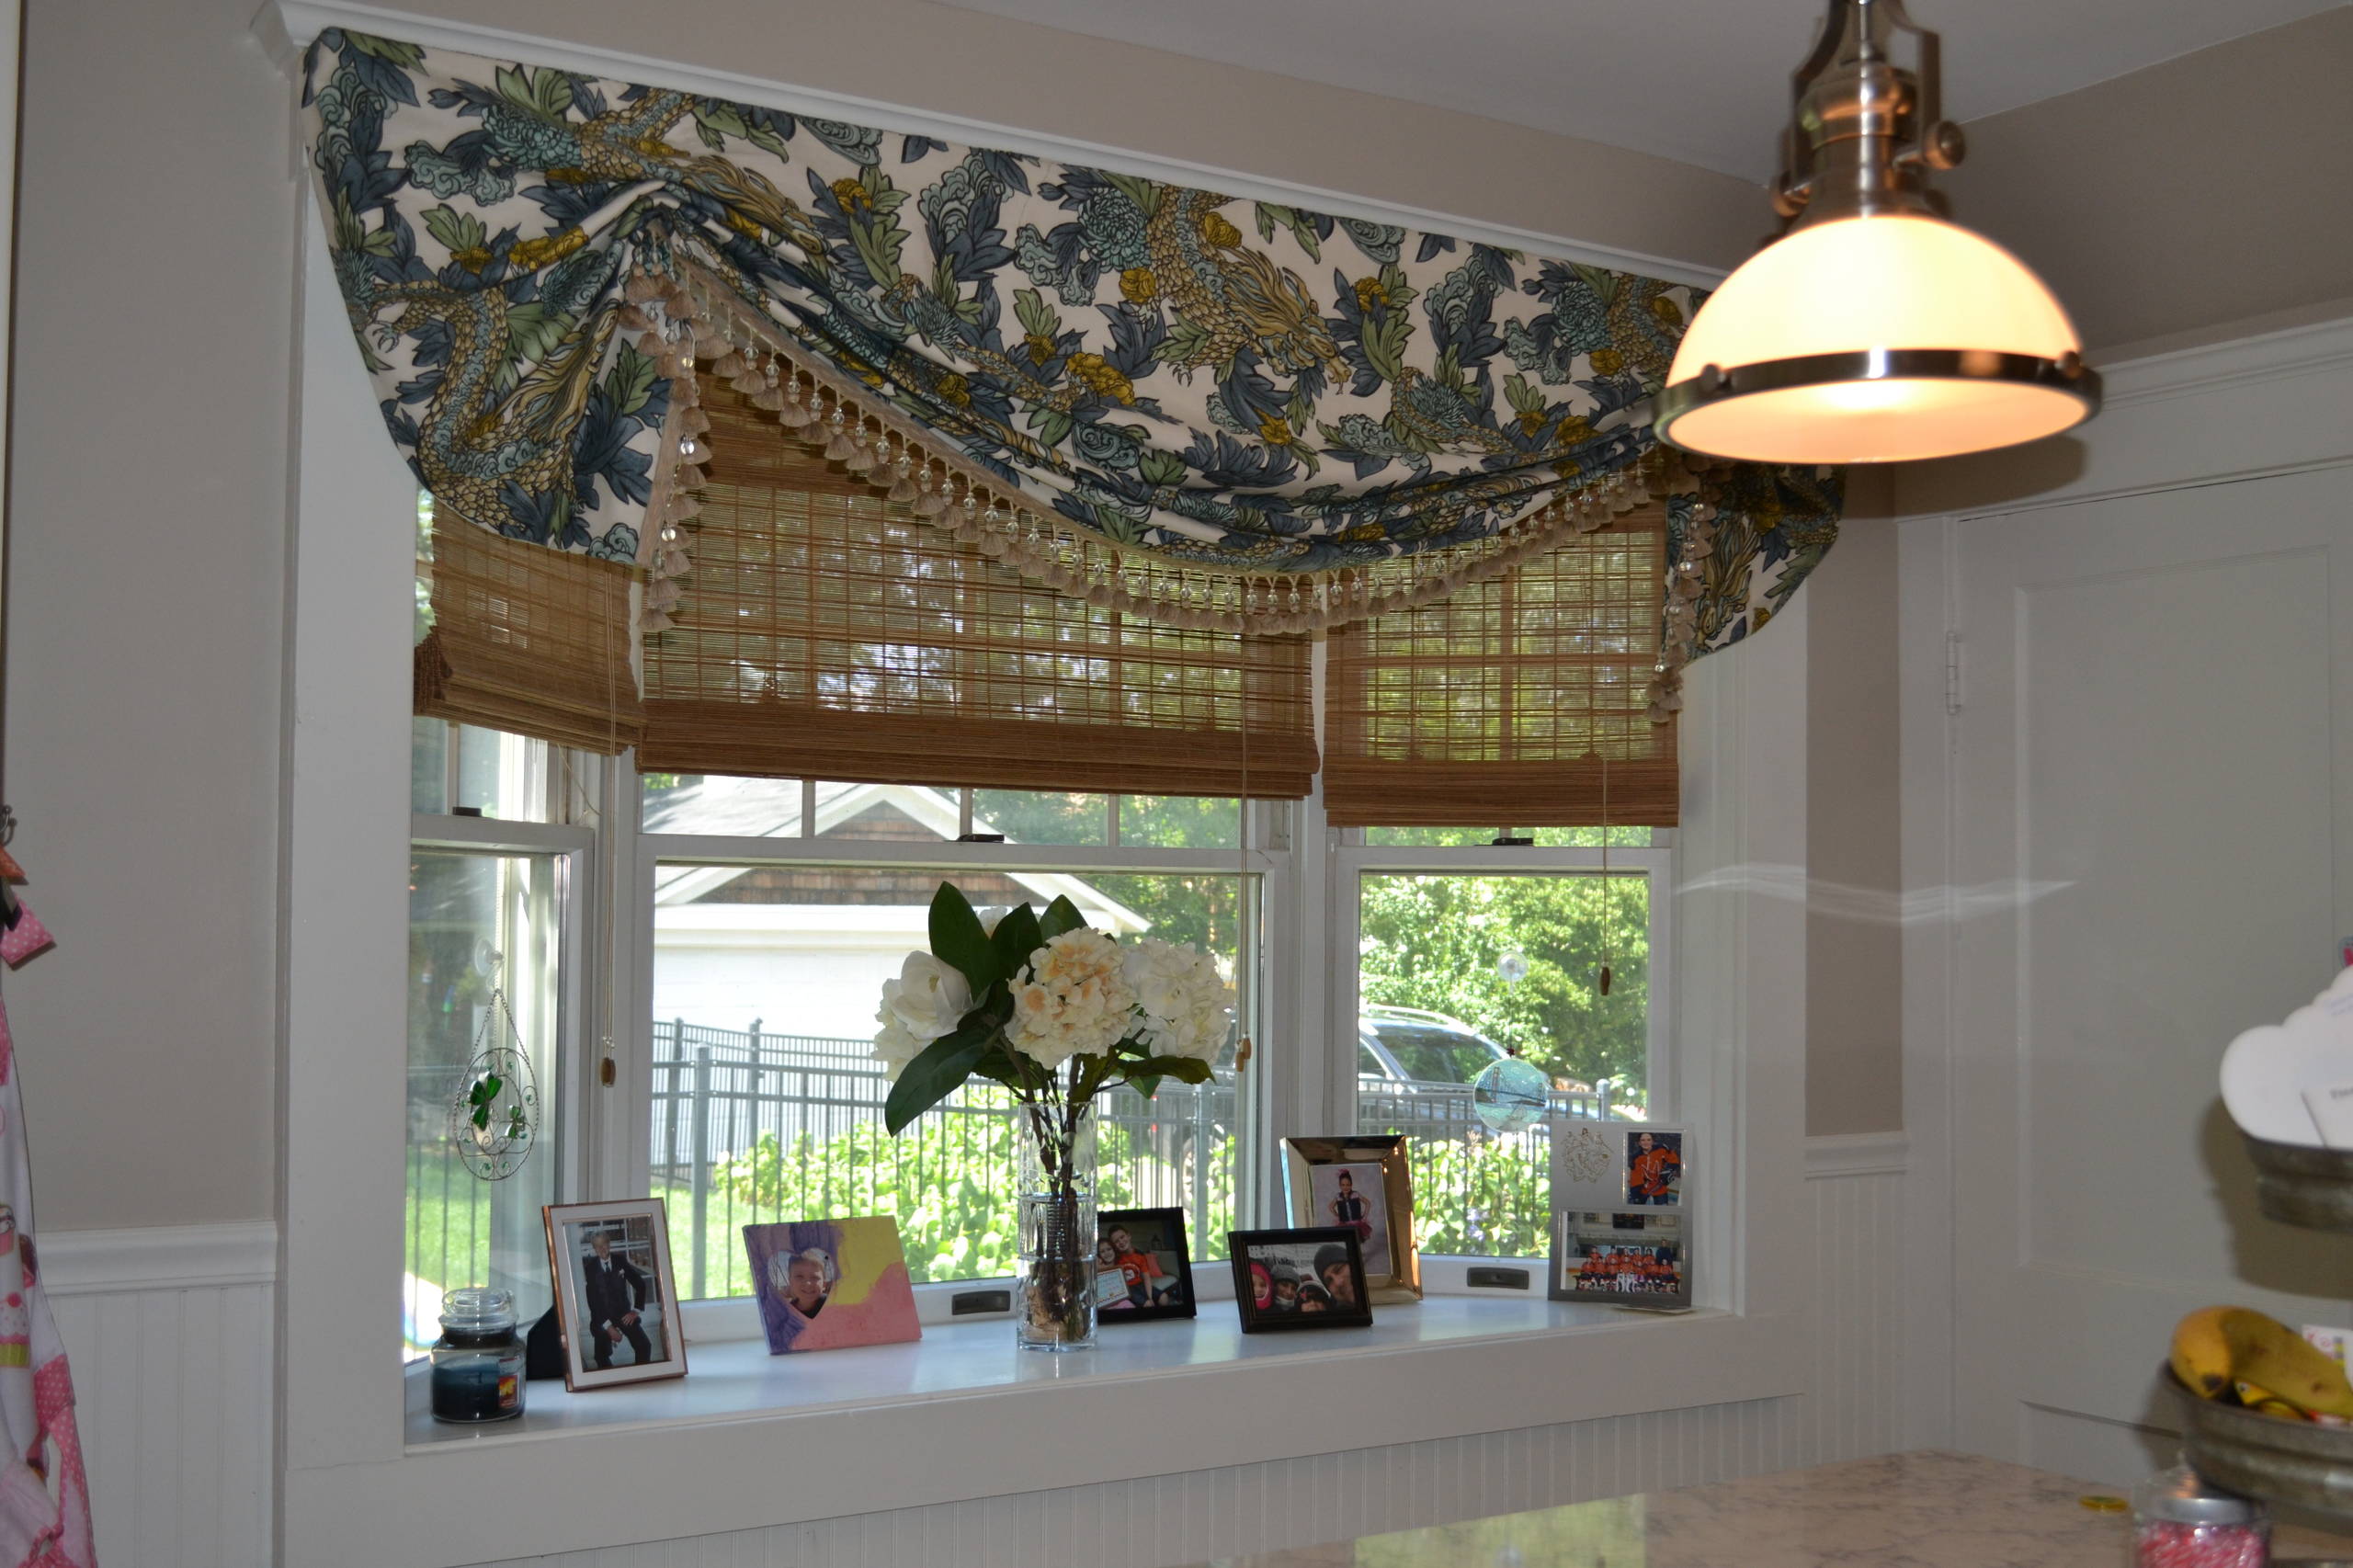 Stationary London Shade Valance on a Bay Window in a Connecticut Kitchen